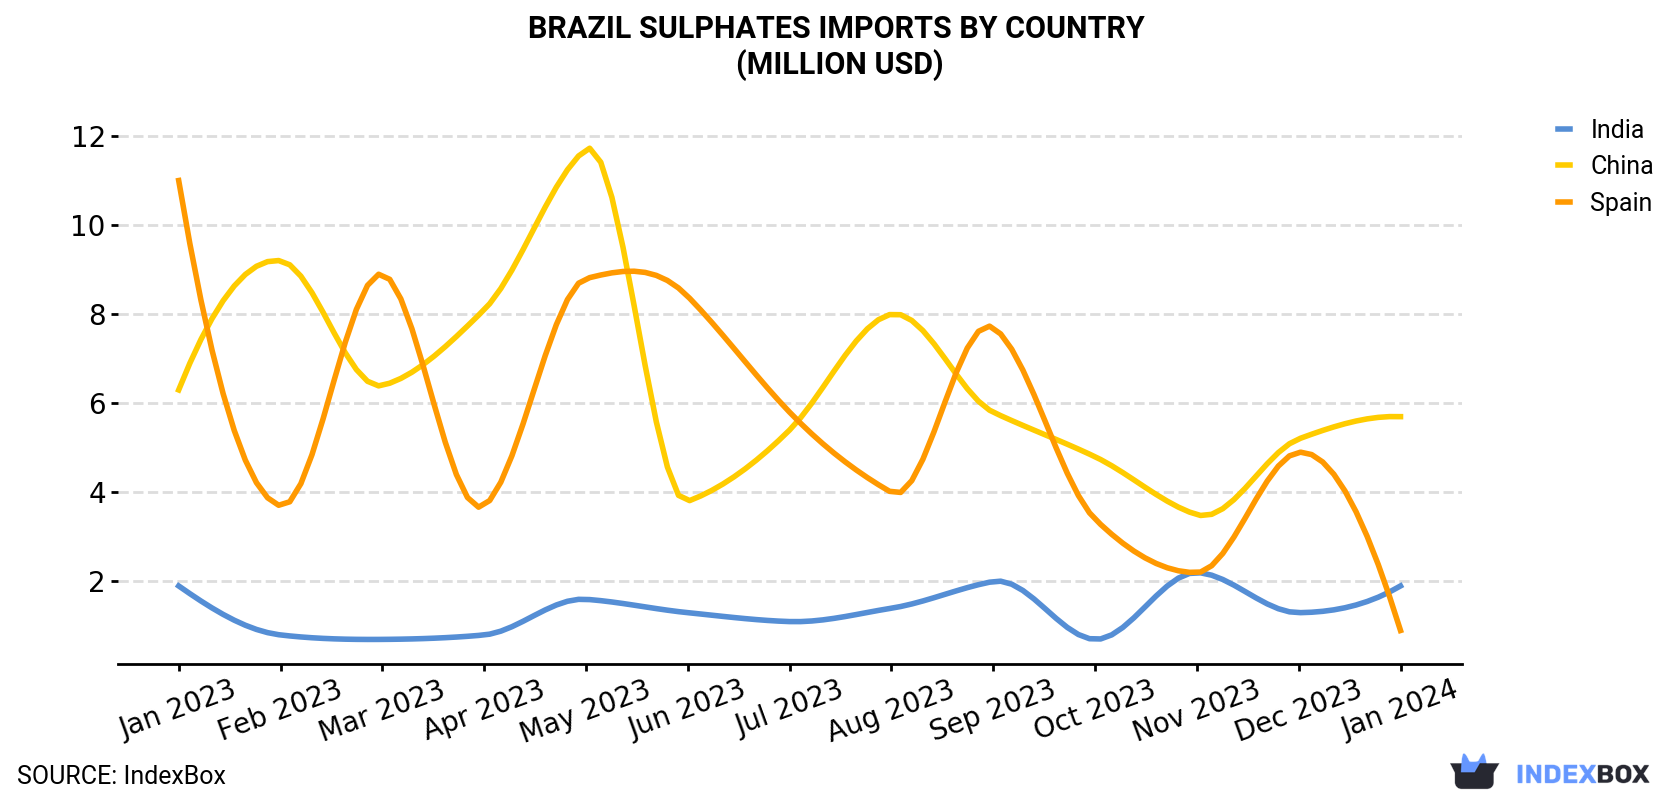 Brazil Sulphates Imports By Country (Million USD)